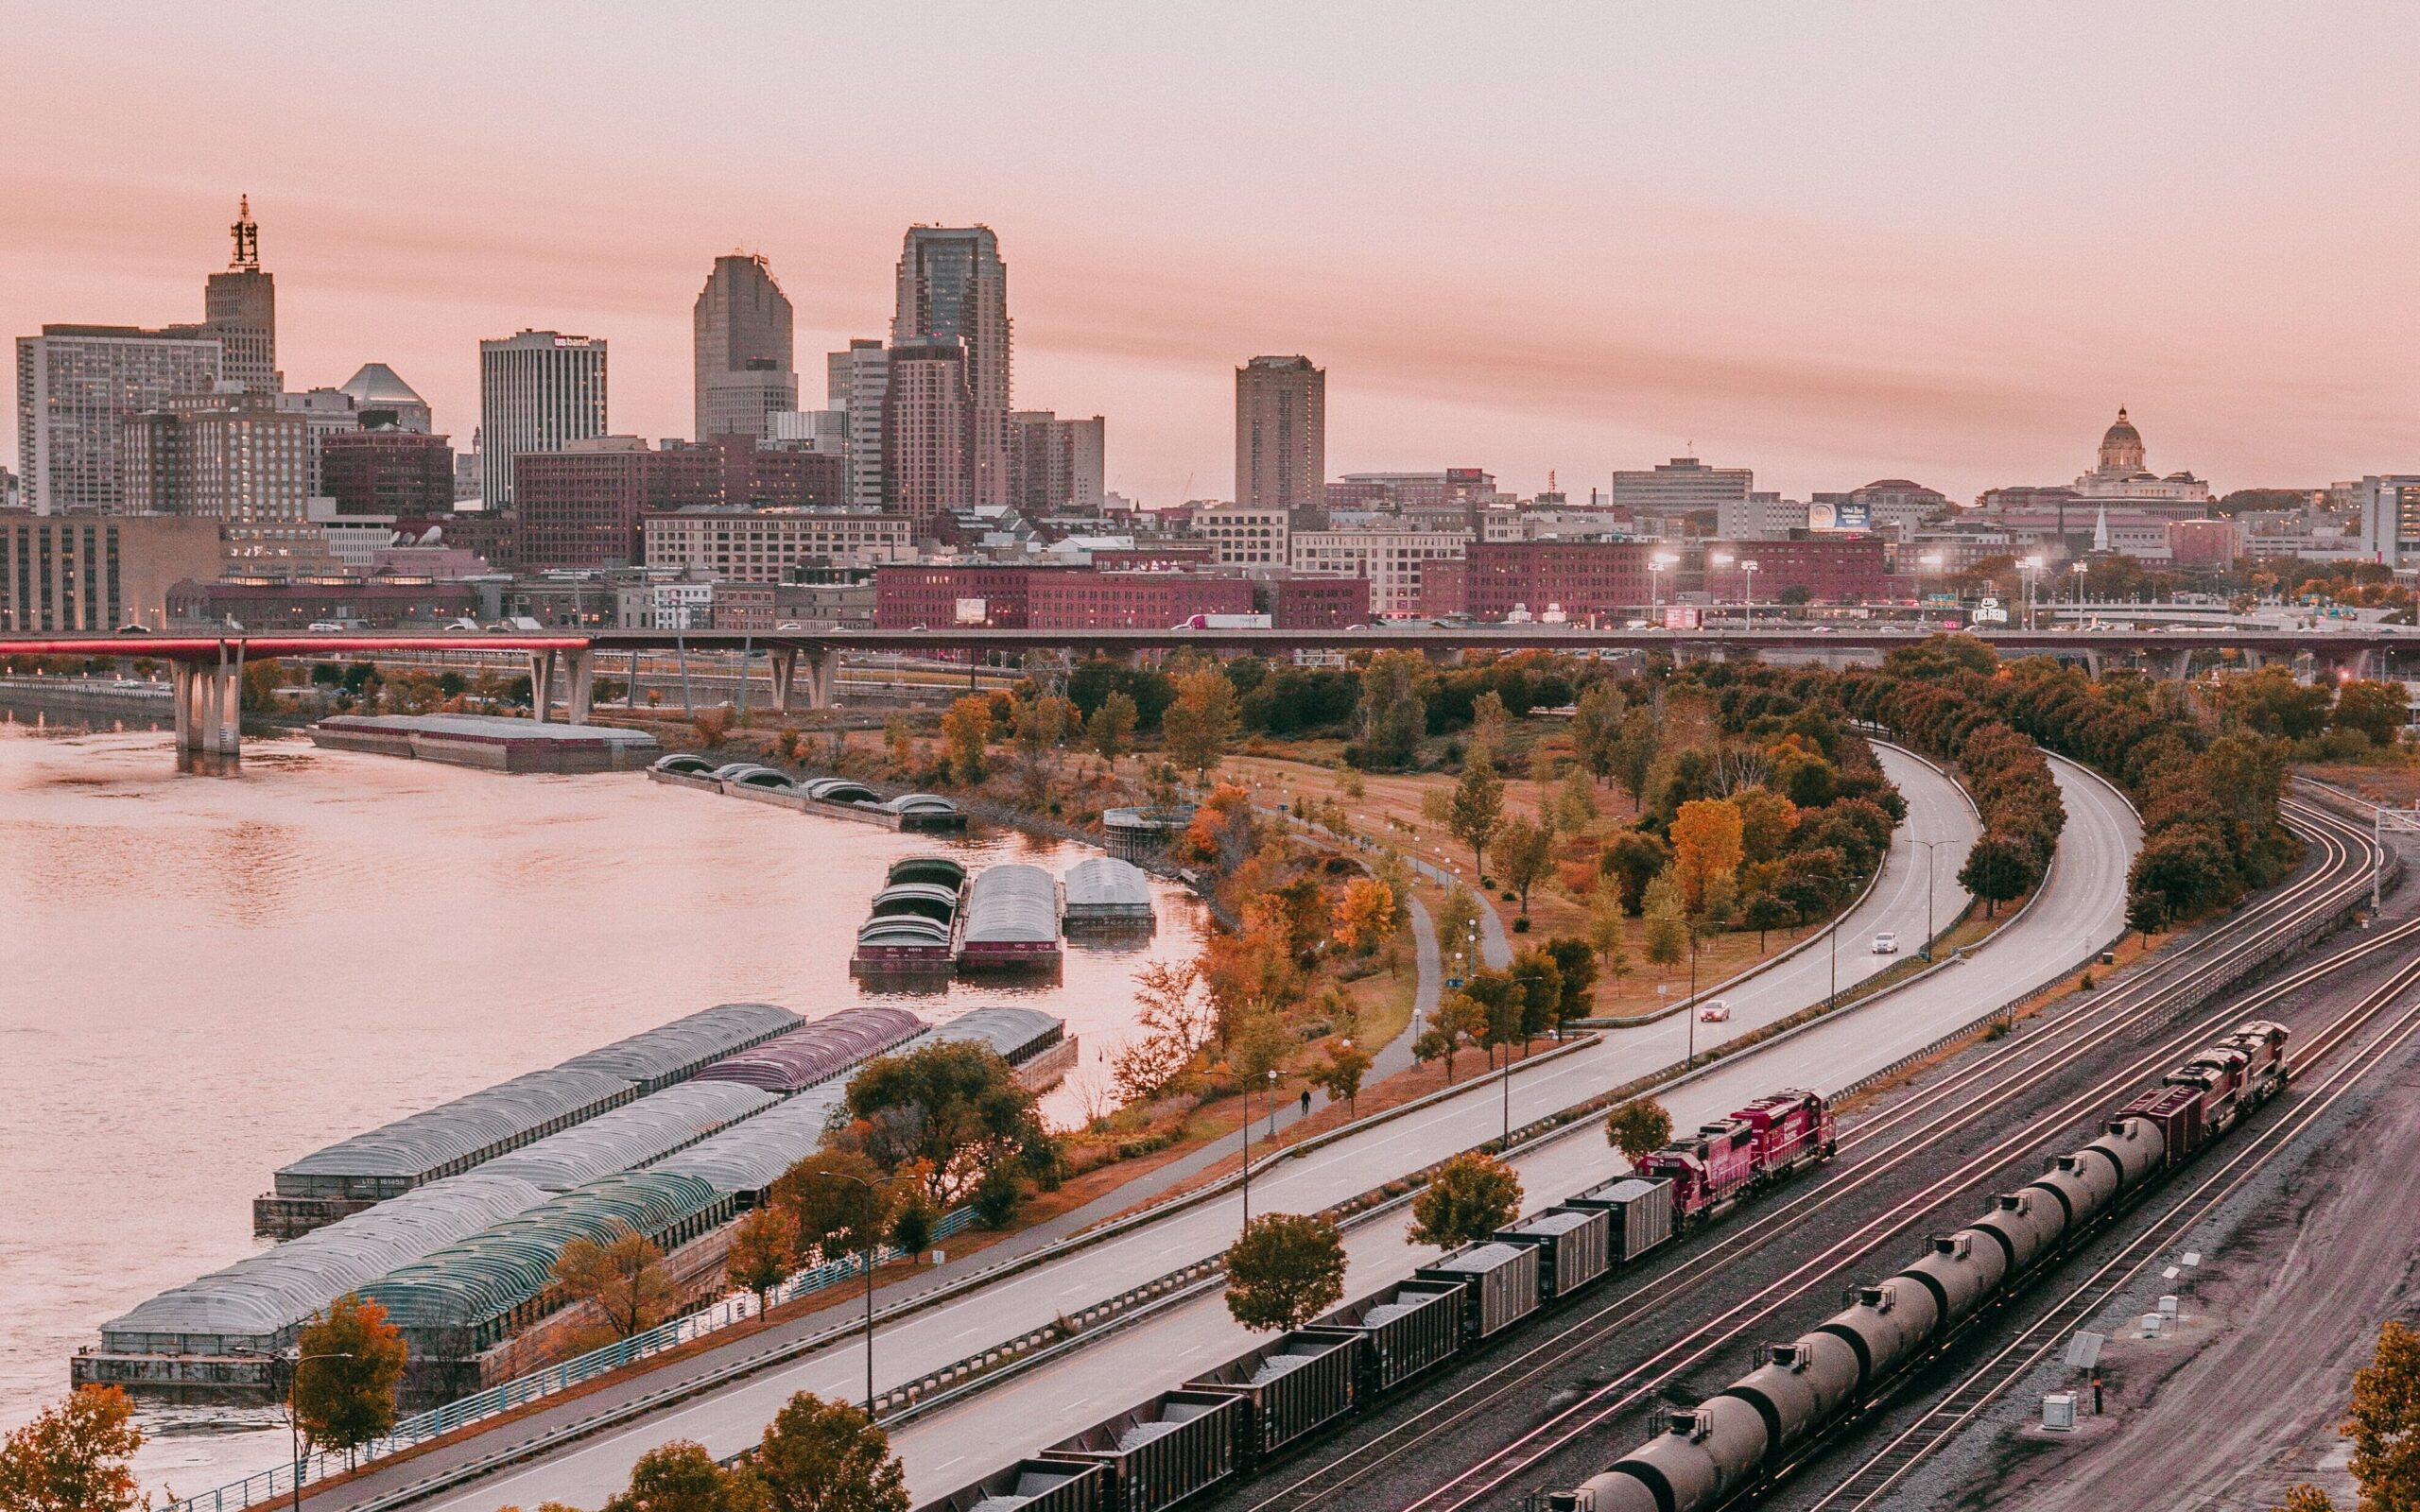 Skyline of Saint Paul with barges, roadways and trains